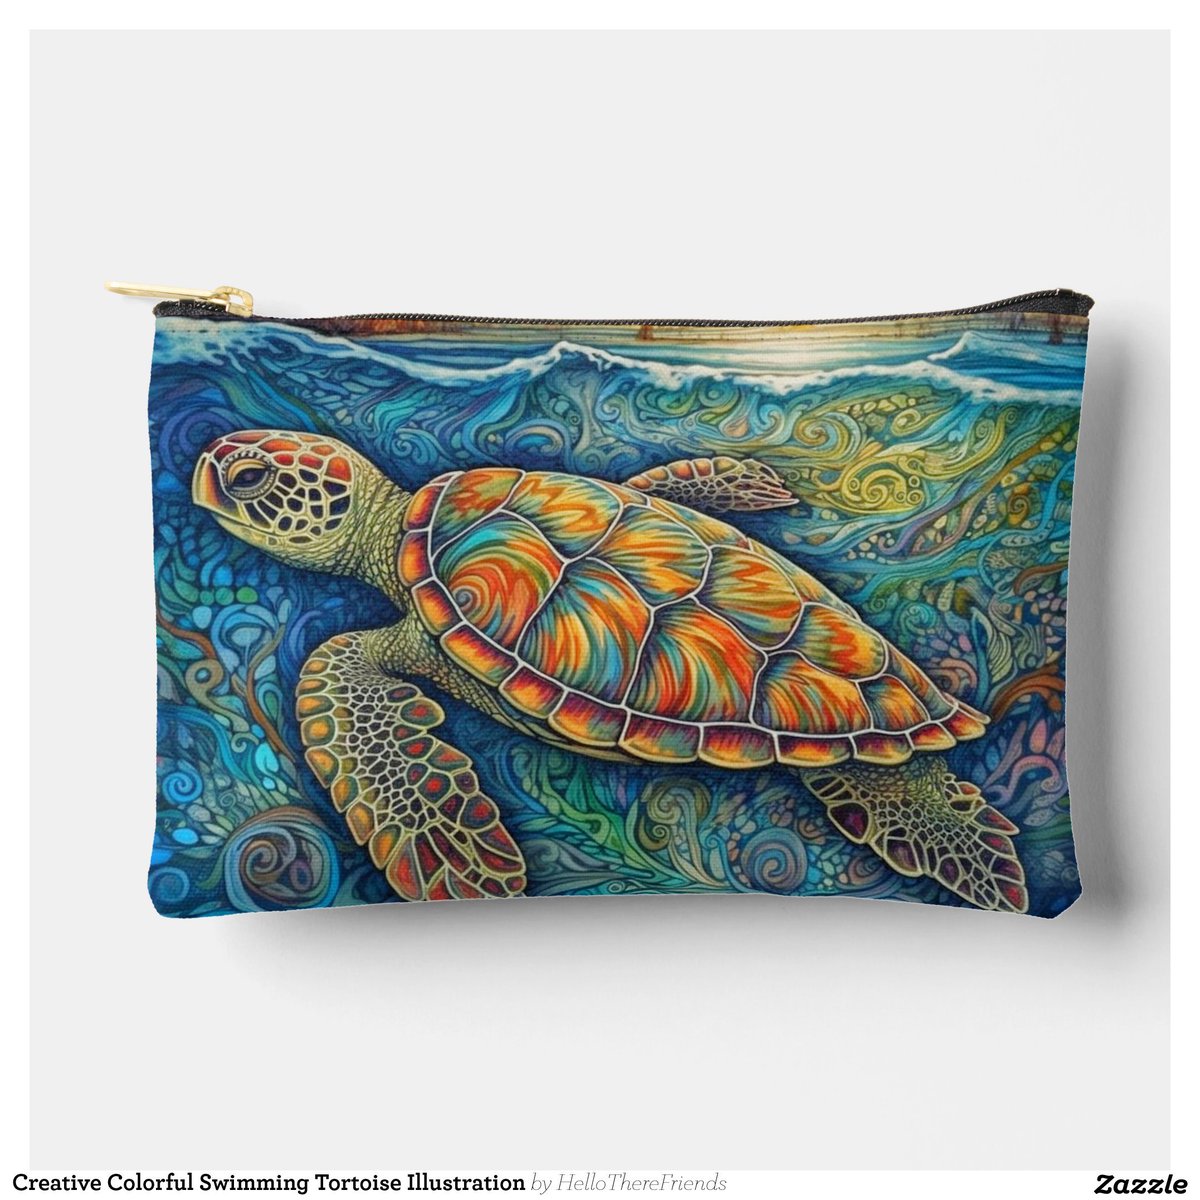 Check out this super cute cosmetic accessories travel bag.
Surely this would make a wonderful gift idea→zazzle.com/z/6gncrsuh?rf=…

#Handbags #MakeUpBag #TravelBag #Traveling #GiftIdeas #Daughters #MothersDay #Turtles #Tortoises #Sale #Zazzle